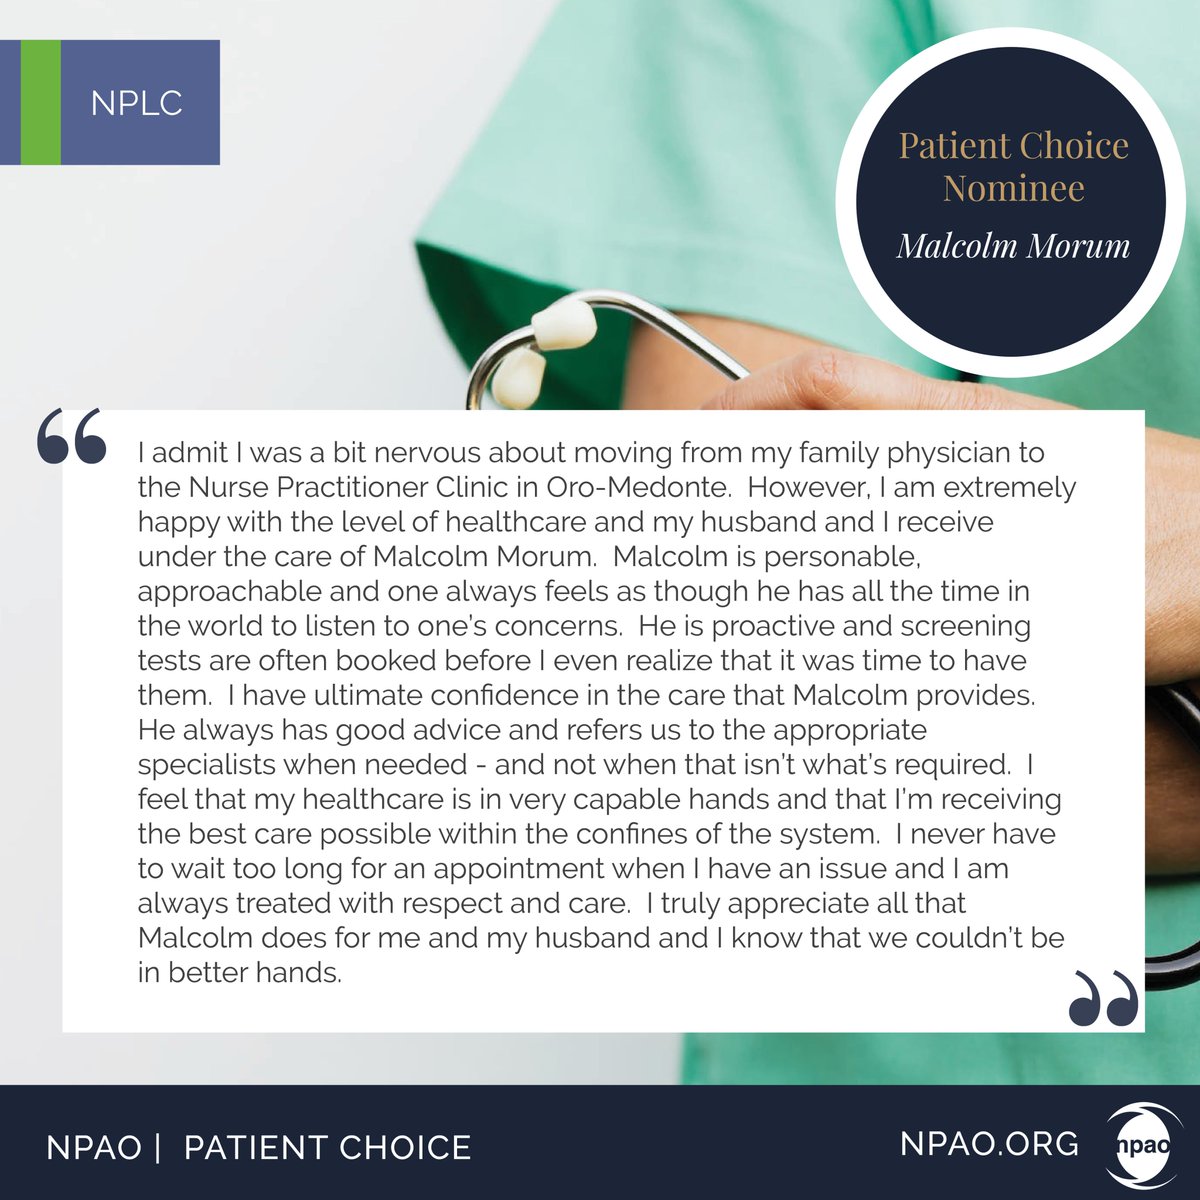 Celebrate Nurse Practitioners (#NPs)! Recognize their compassion & clinical excellence. Explore 2023 Patient Choice submissions & nominate a Nurse Practitioner for the 2024 Patient Choice Award: npao.org/pca #PatientChoice